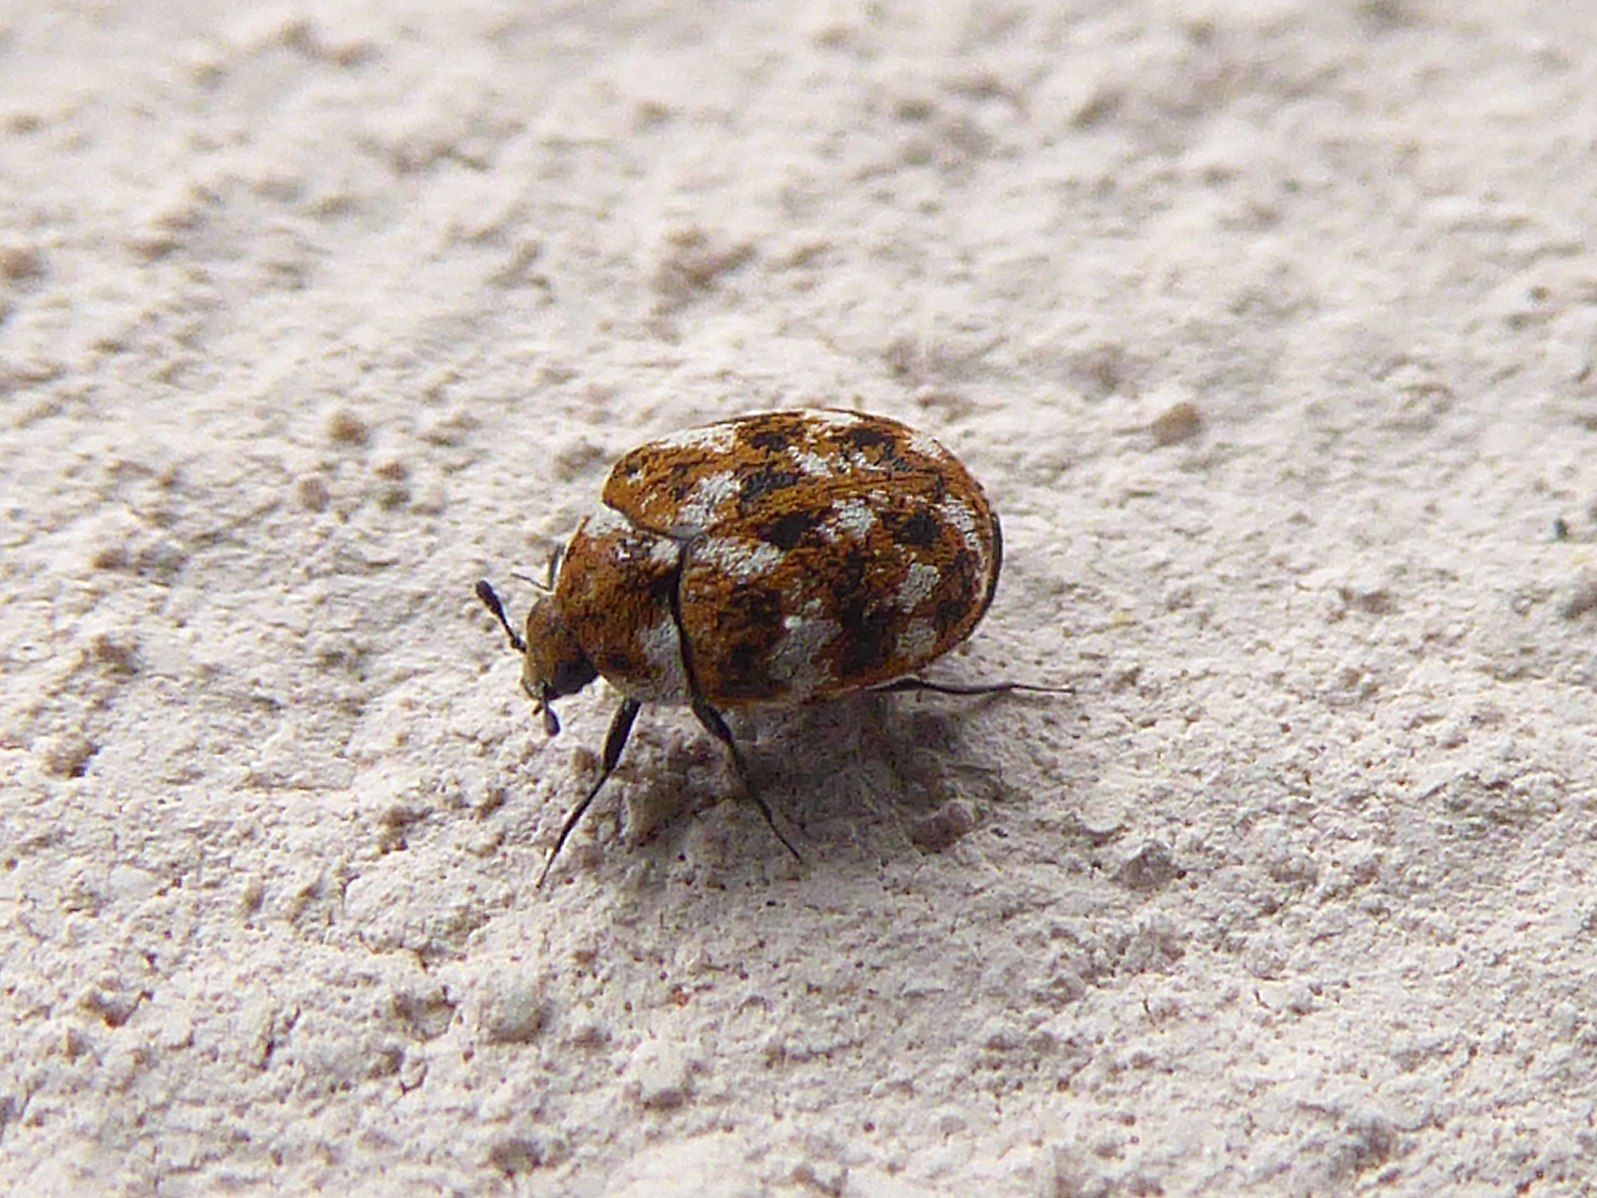 How To Get Rid Of Carpet Beetles - Carpet Beetle Removal Tips